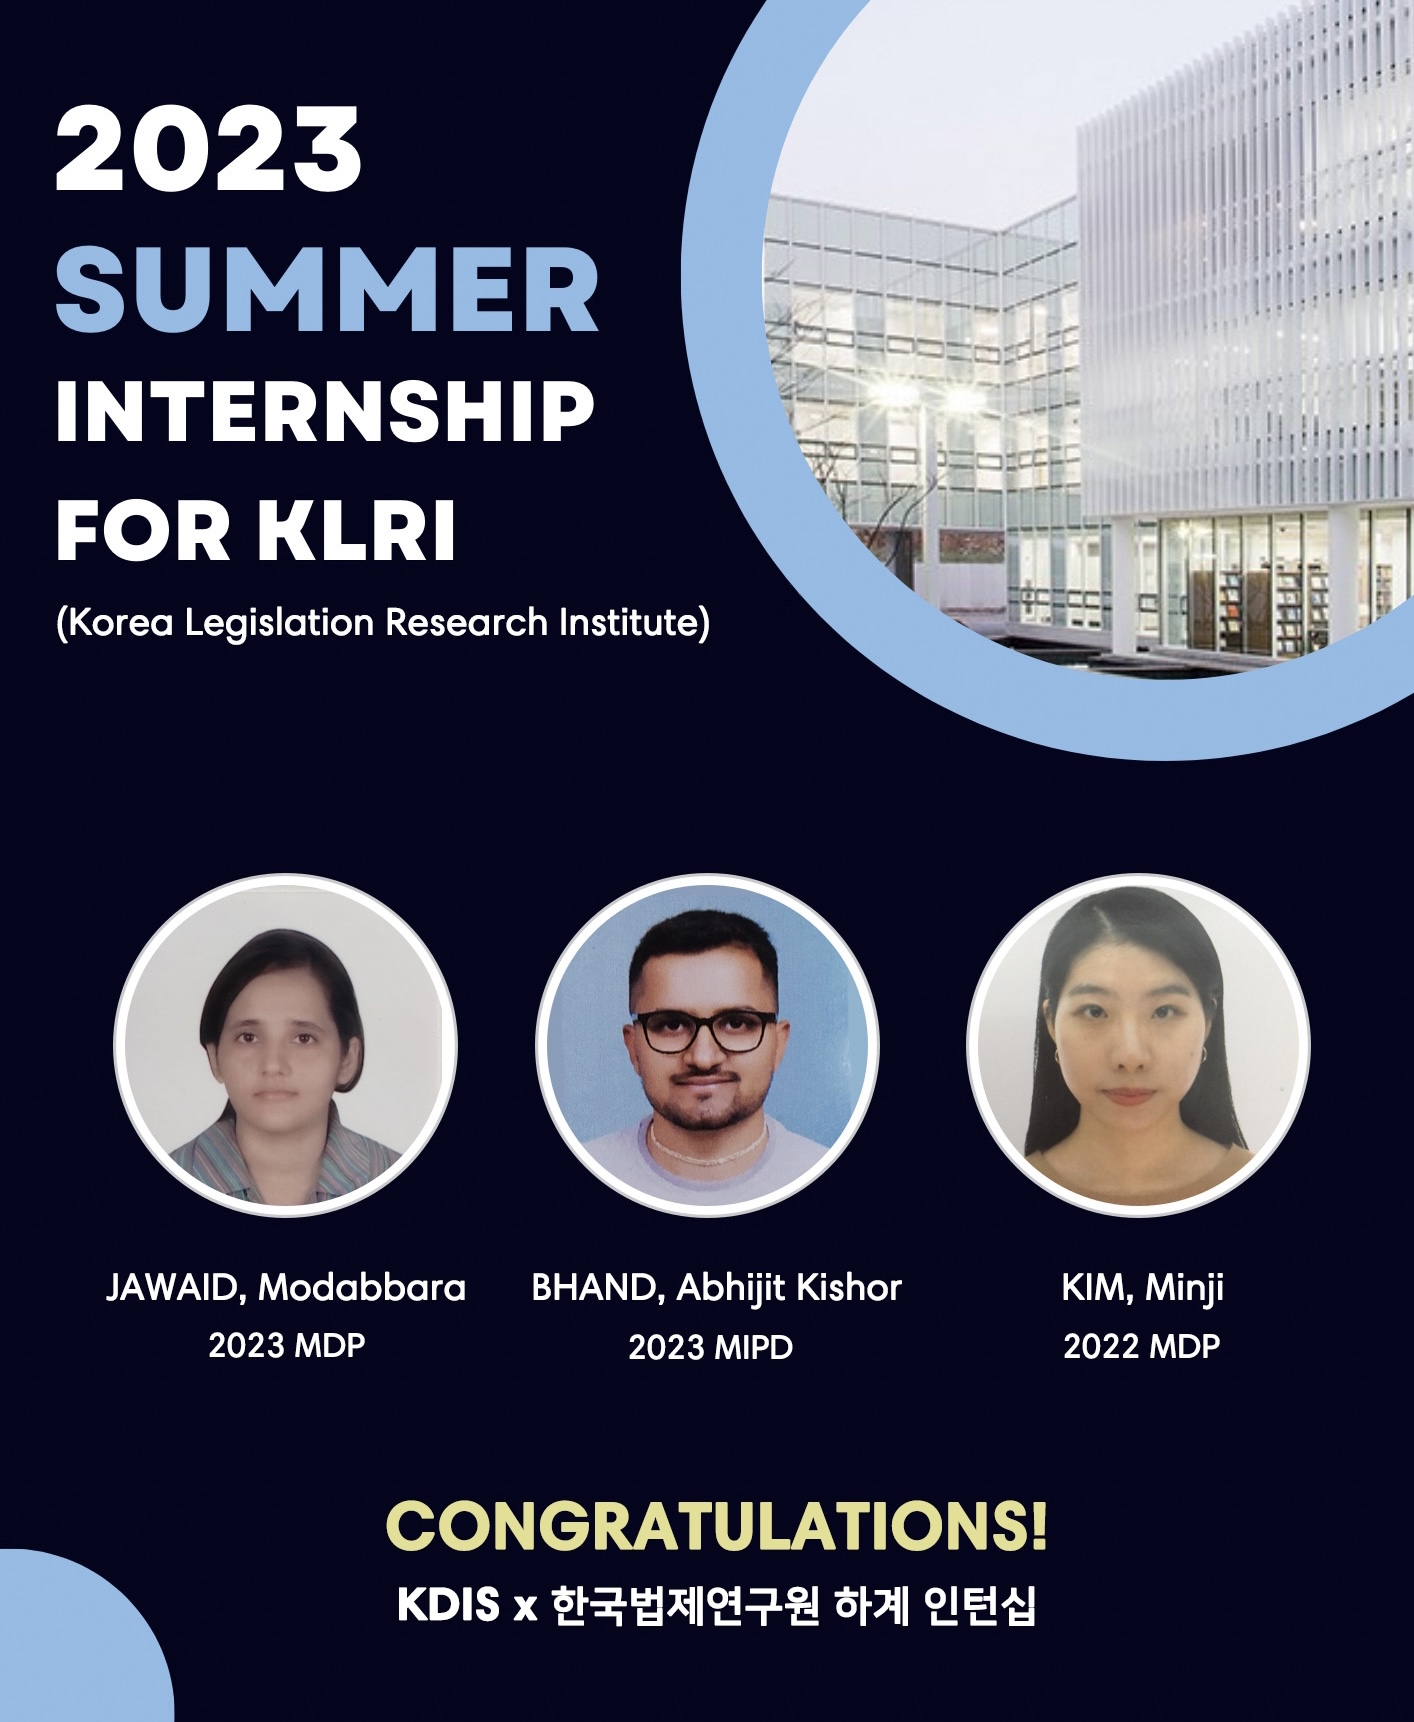 3 KDIS students have been selected for the 2023 Summer Internship at KLRI 사진1